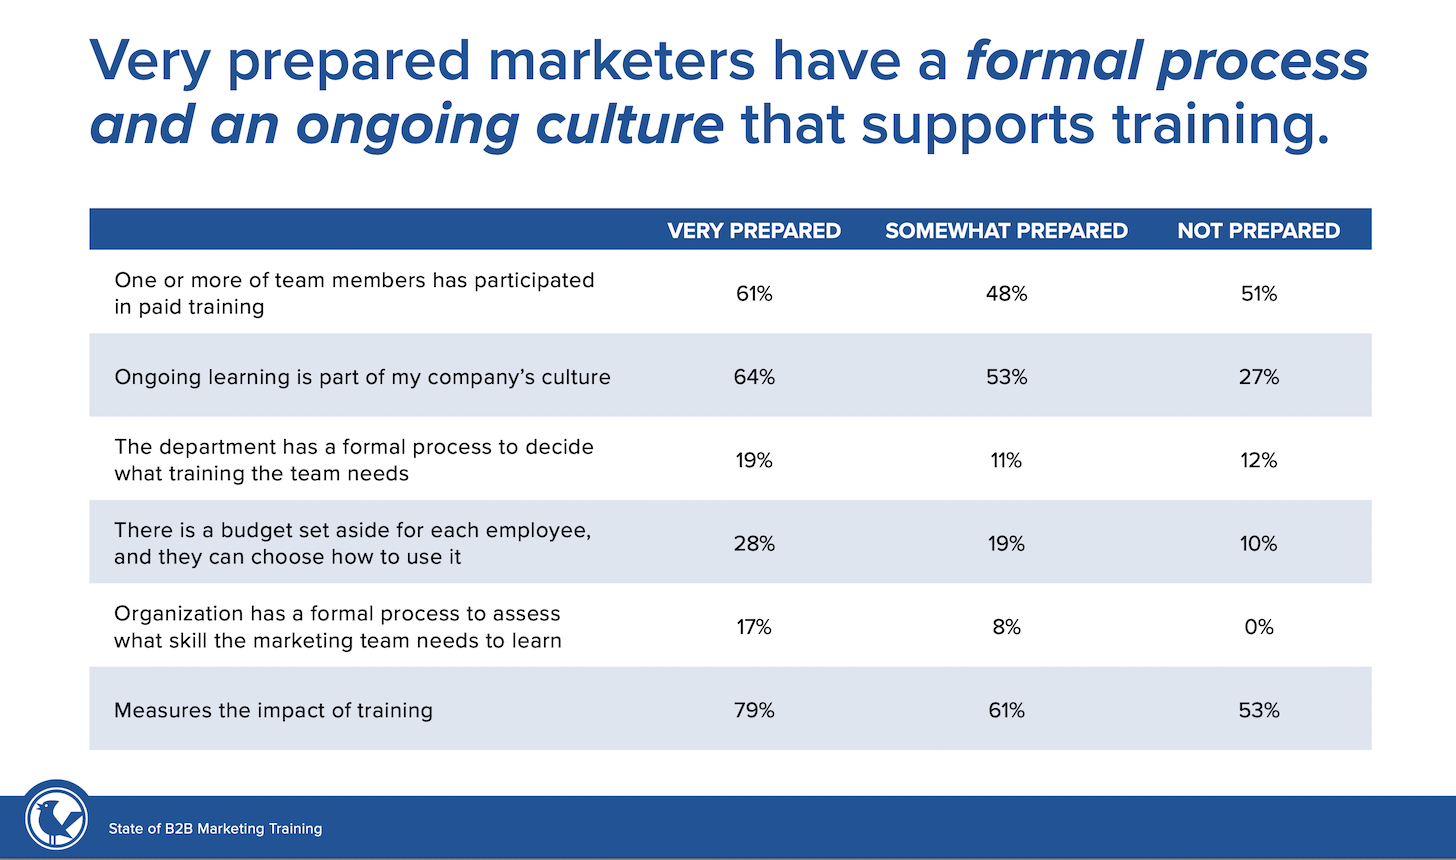 Very Prepared Marketers Have a Formal Process and an Ongoing Culture That Supports Training